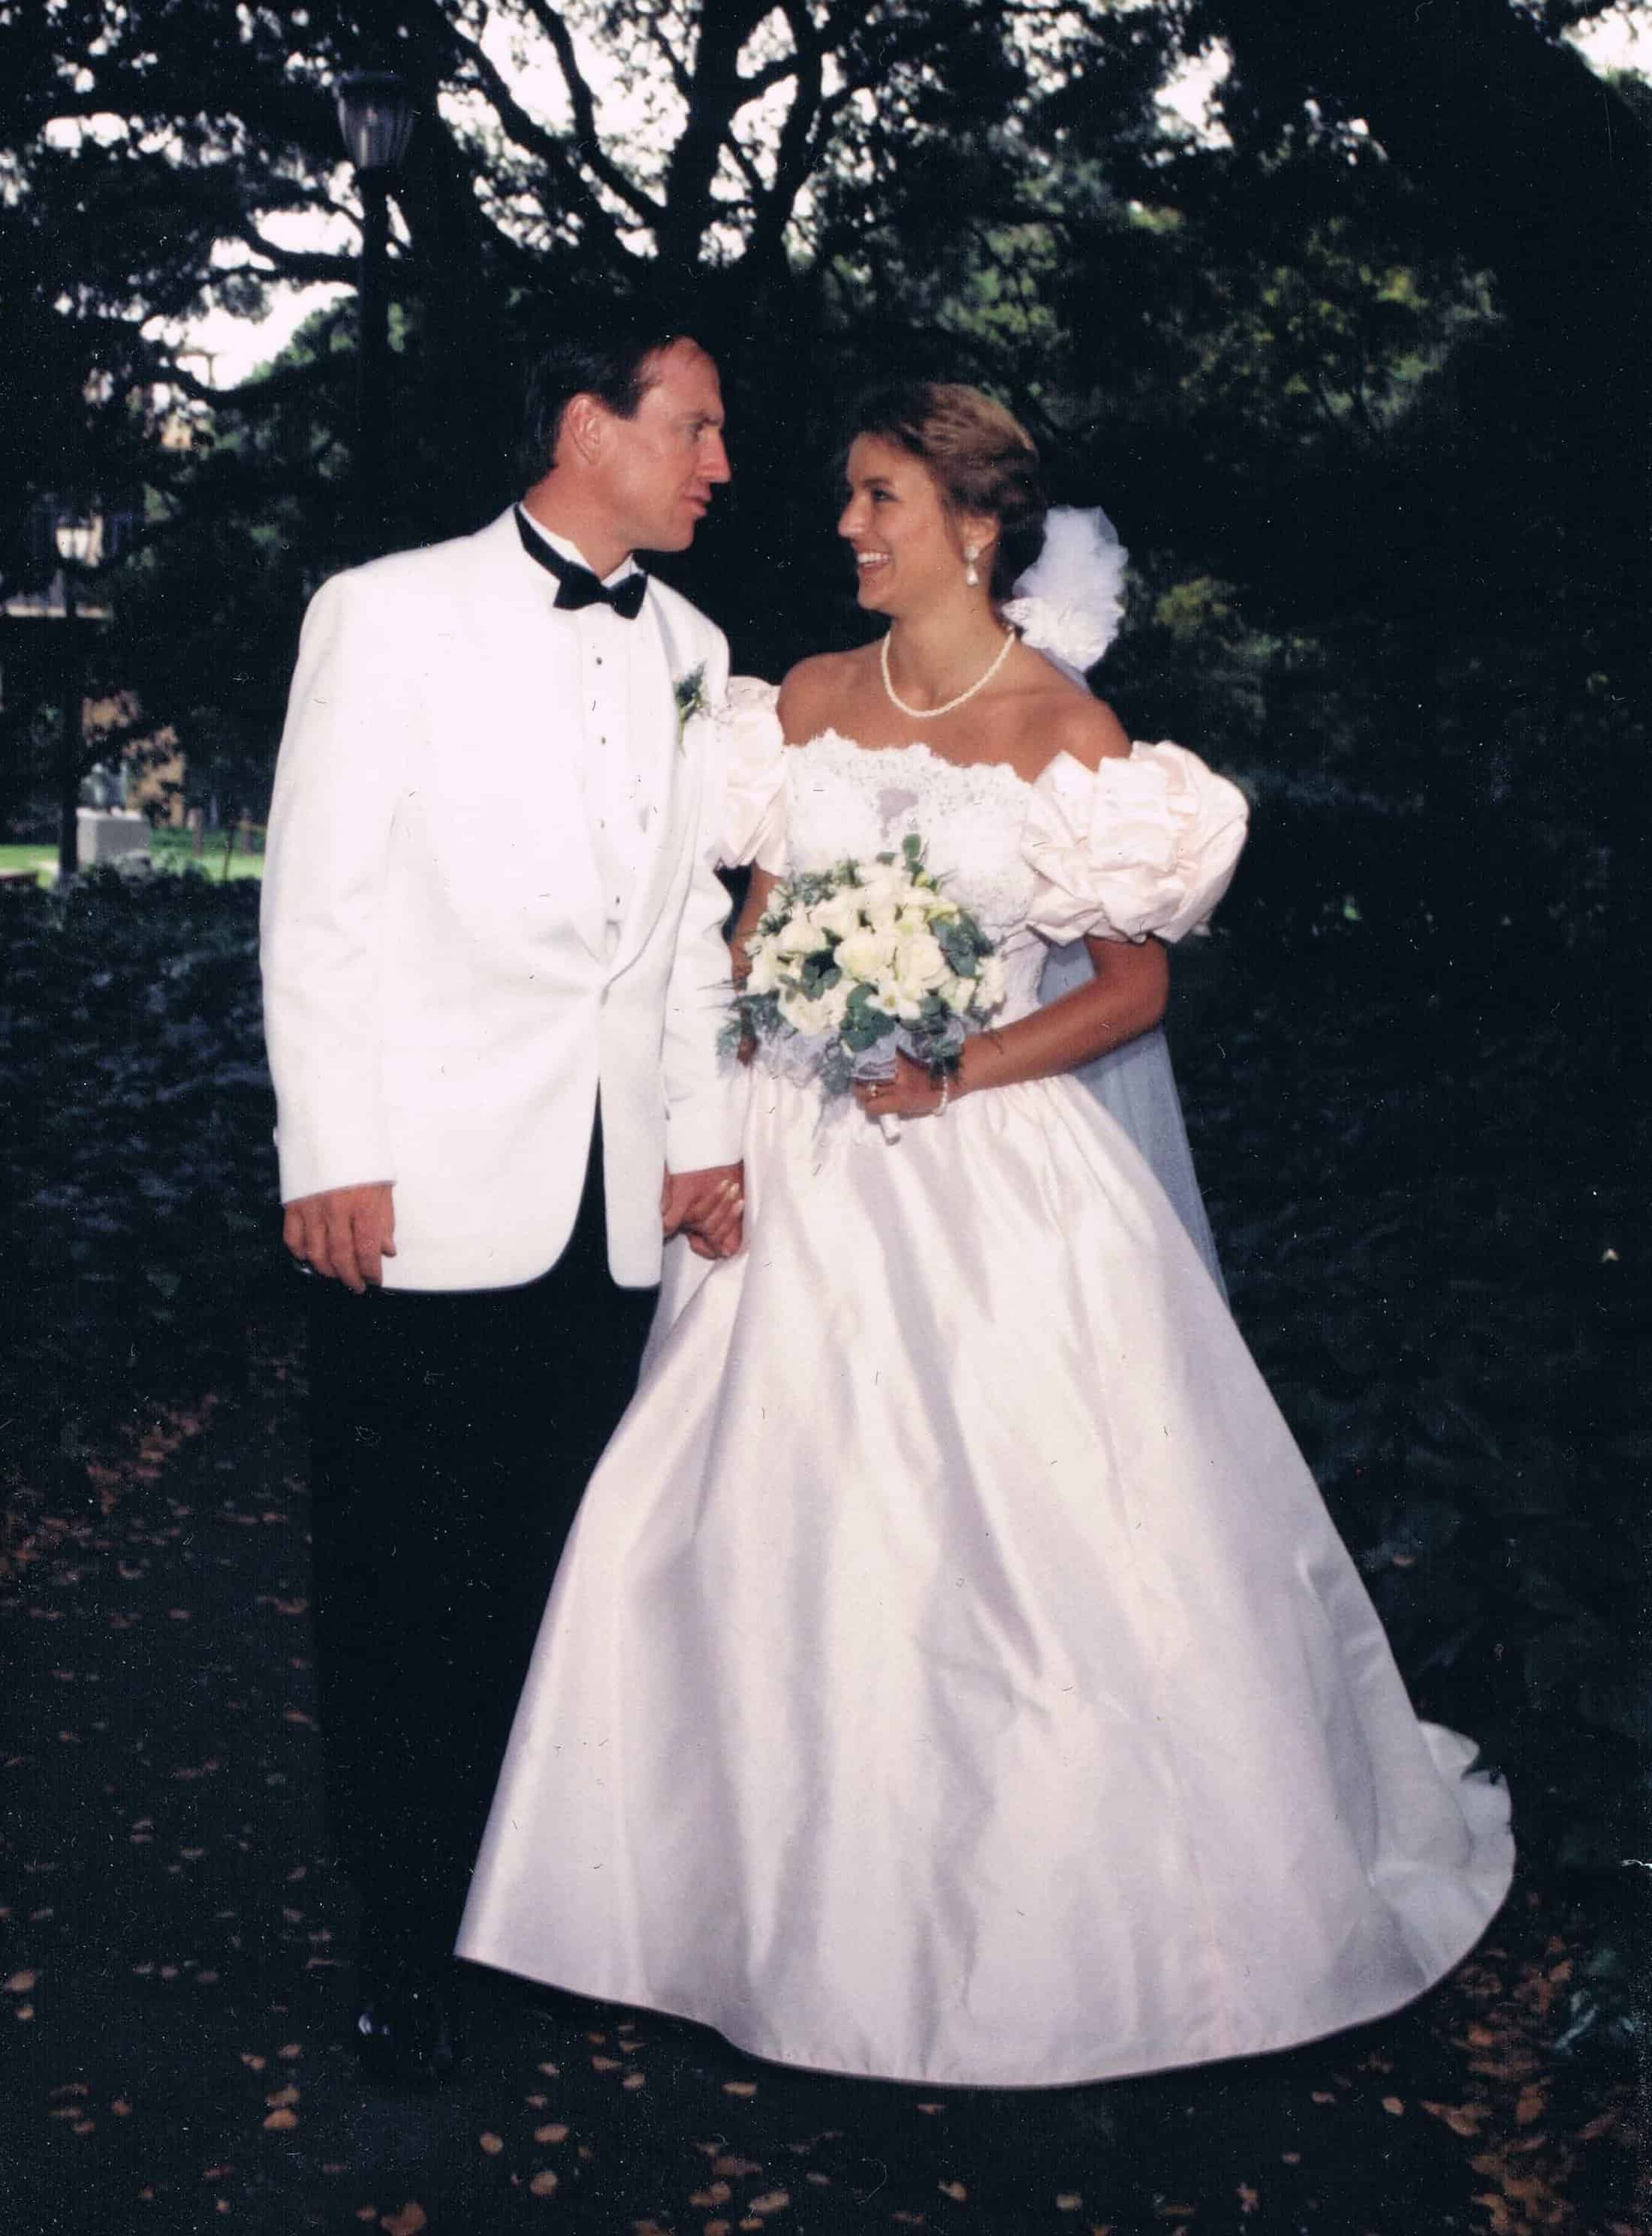 Married to Topher July 6, 1991